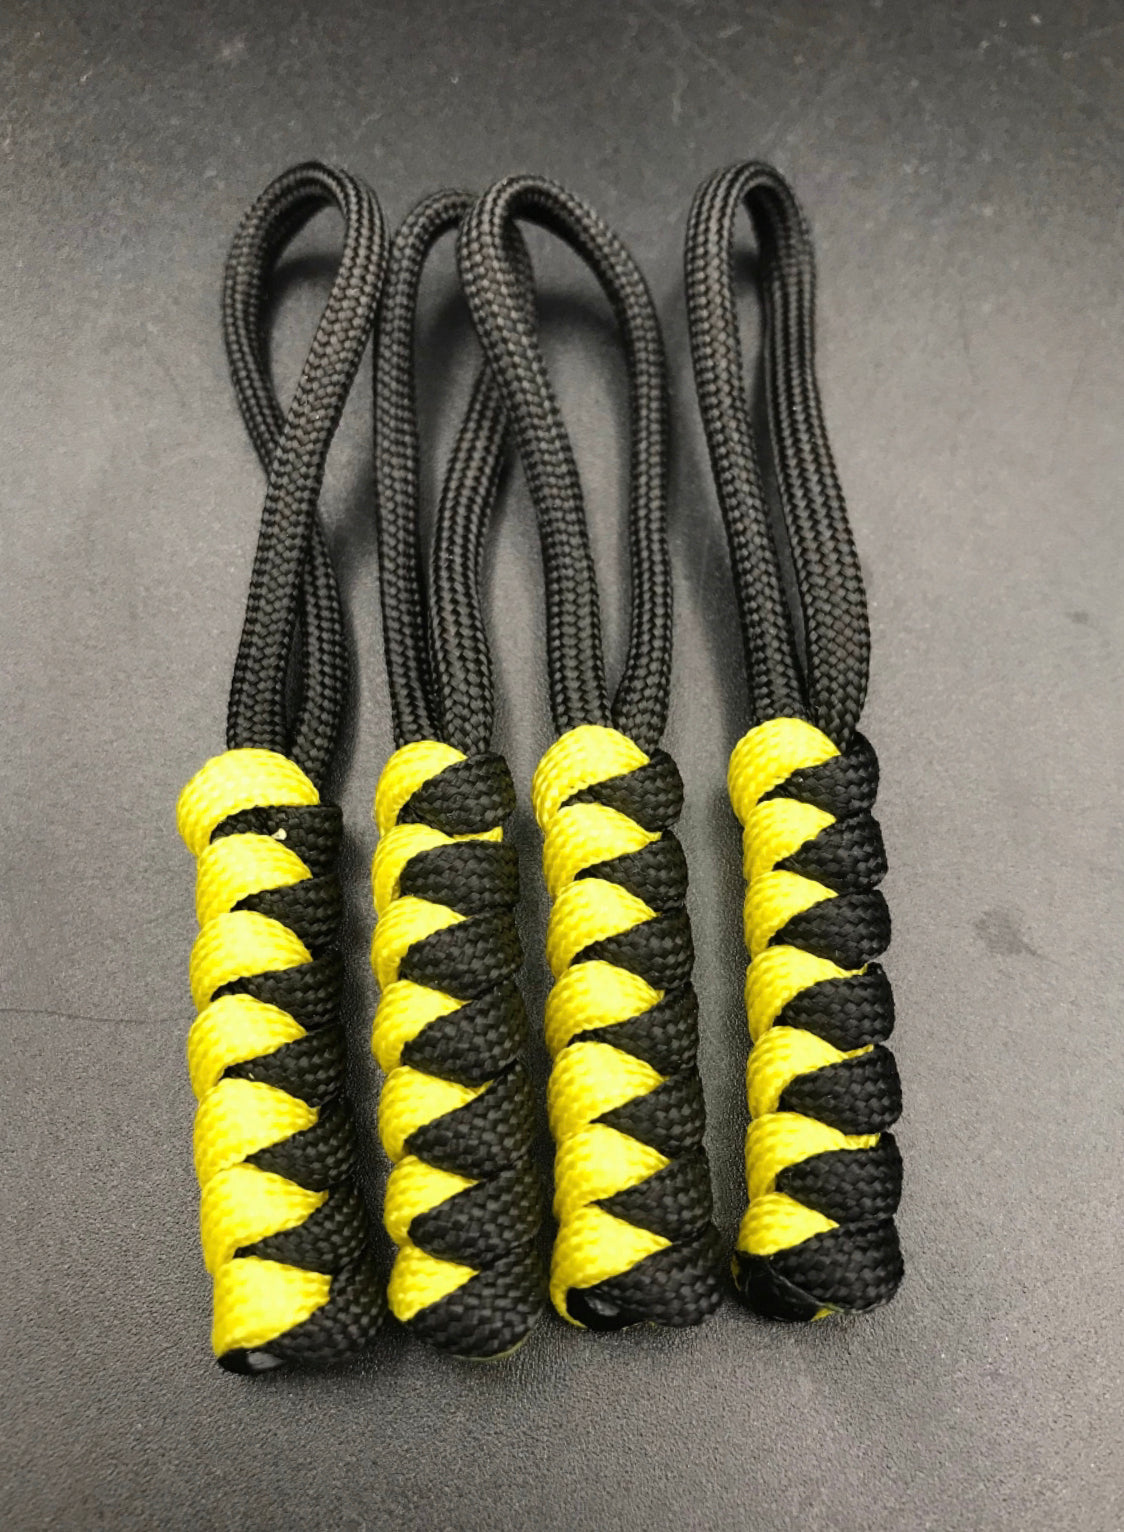 Paracord zip pulls in  black and yellow (4 pack) light weight and strong, handmade in U.K